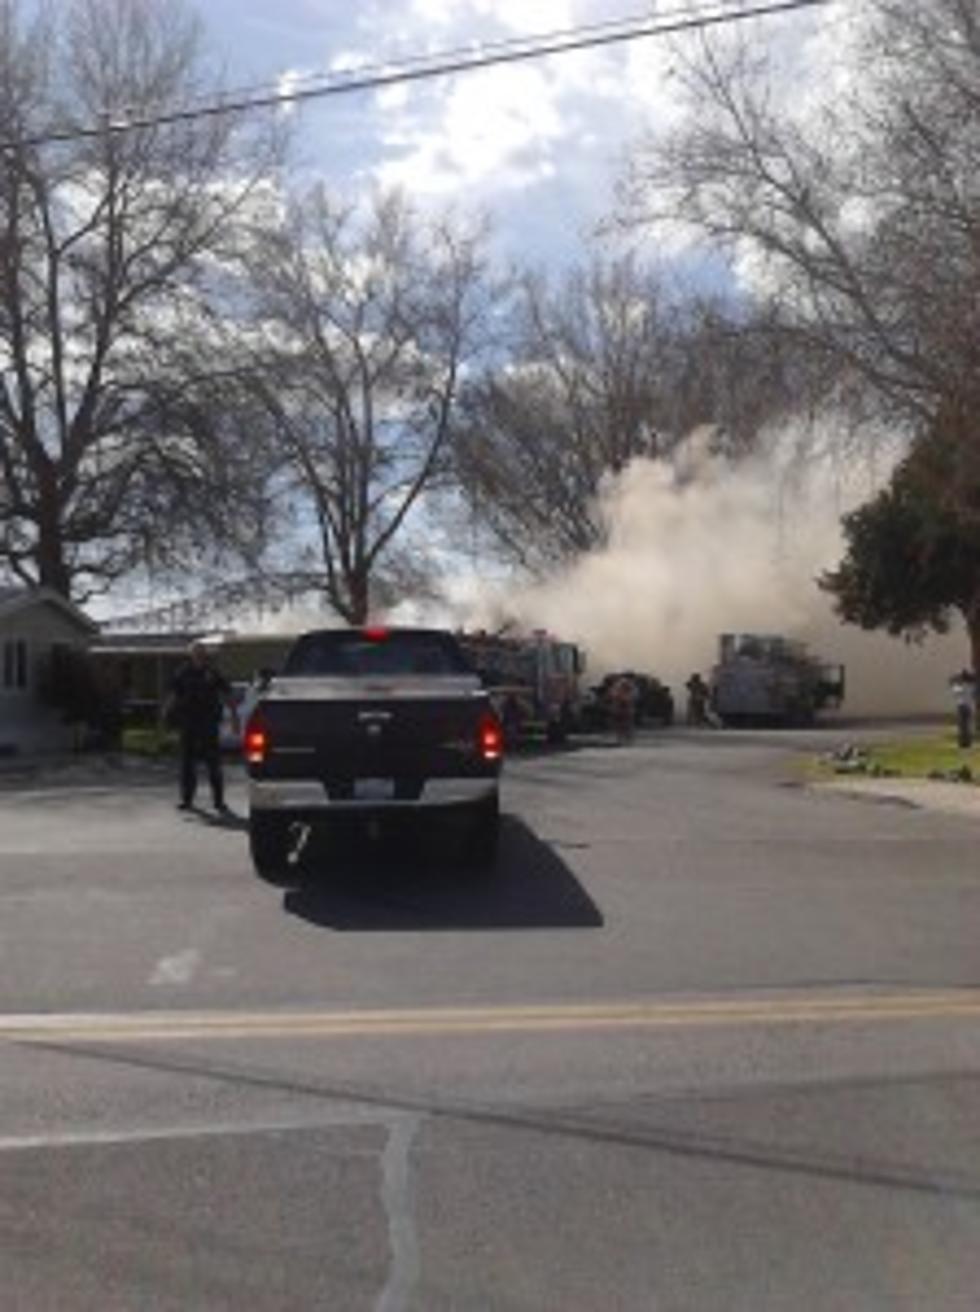 First Responders Battling Trailer Fire in Pasco &#8211; 28th and A Street